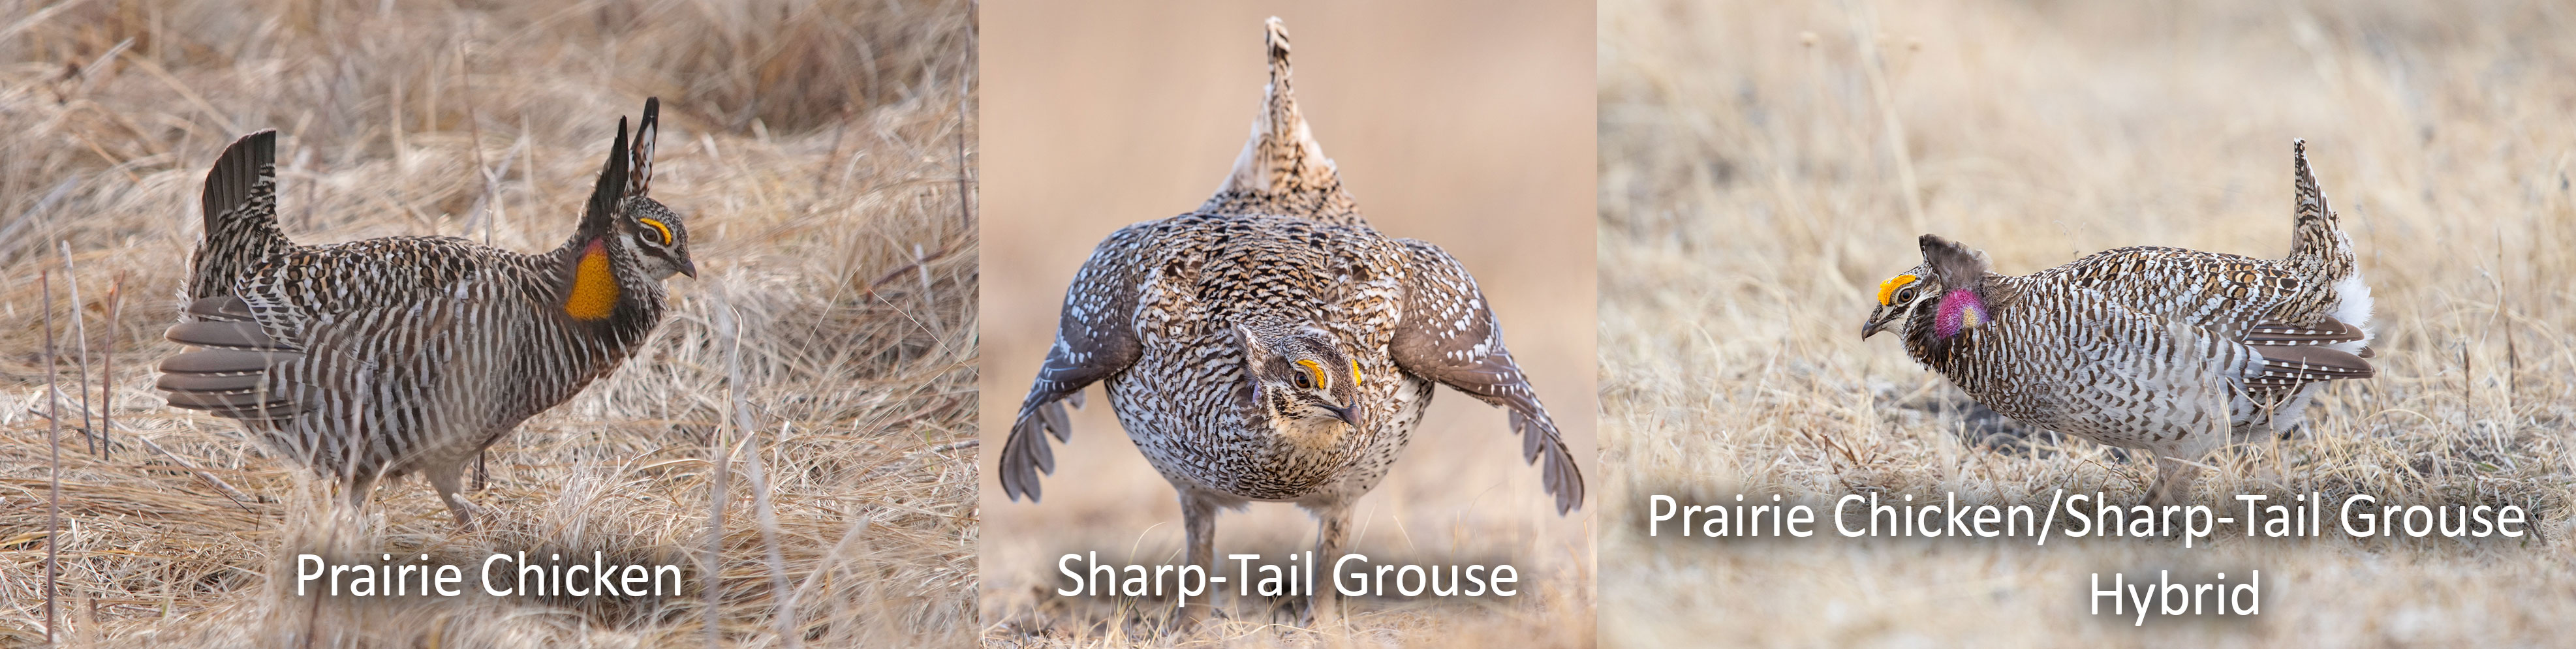 Prairie chicken (left), sharp-tail grouse (middle), prairie chicken/sharp-tail grouse hybrid (right)